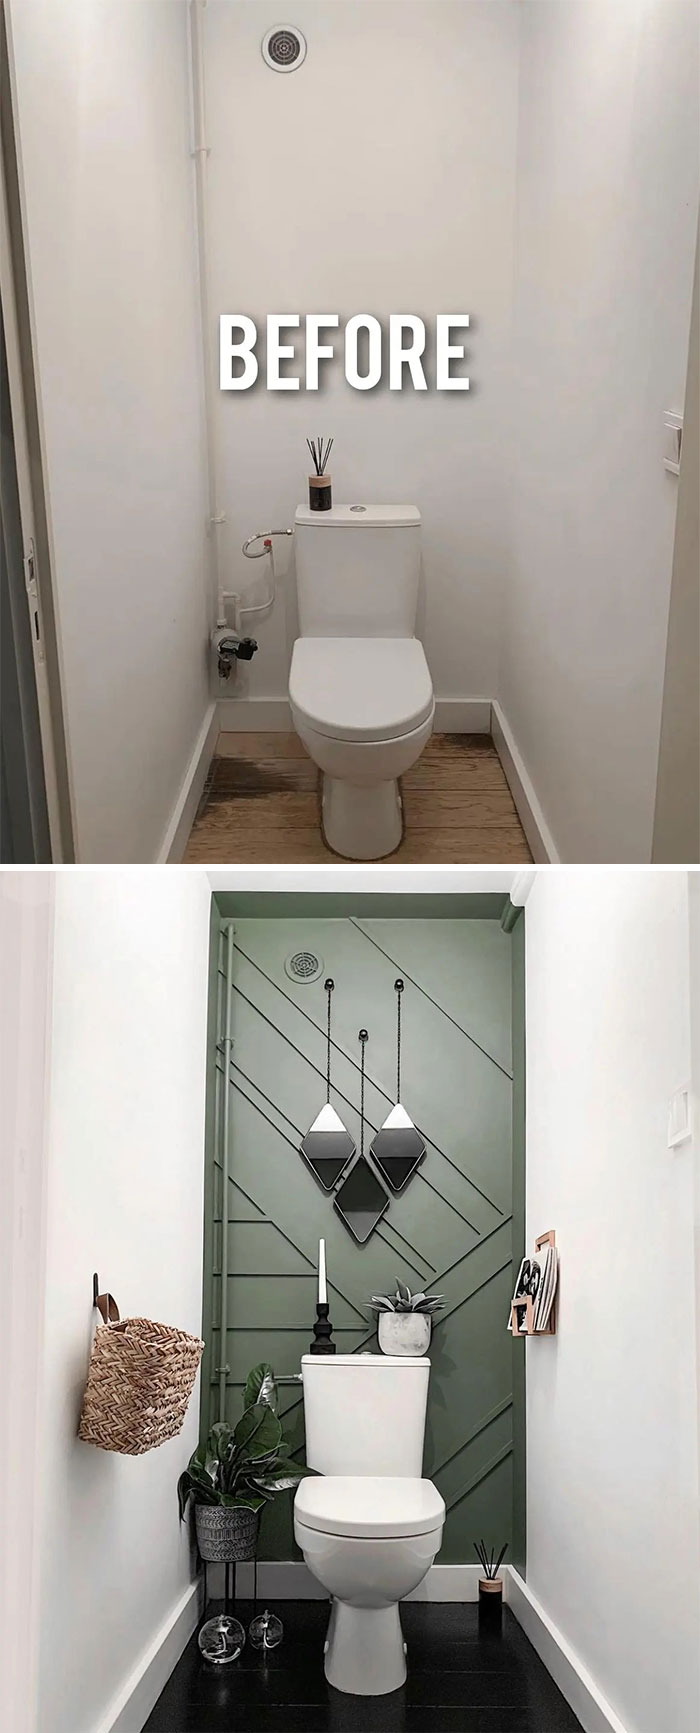 Rate 1-10 This Renovation! 🚽 By: @thibaultmao